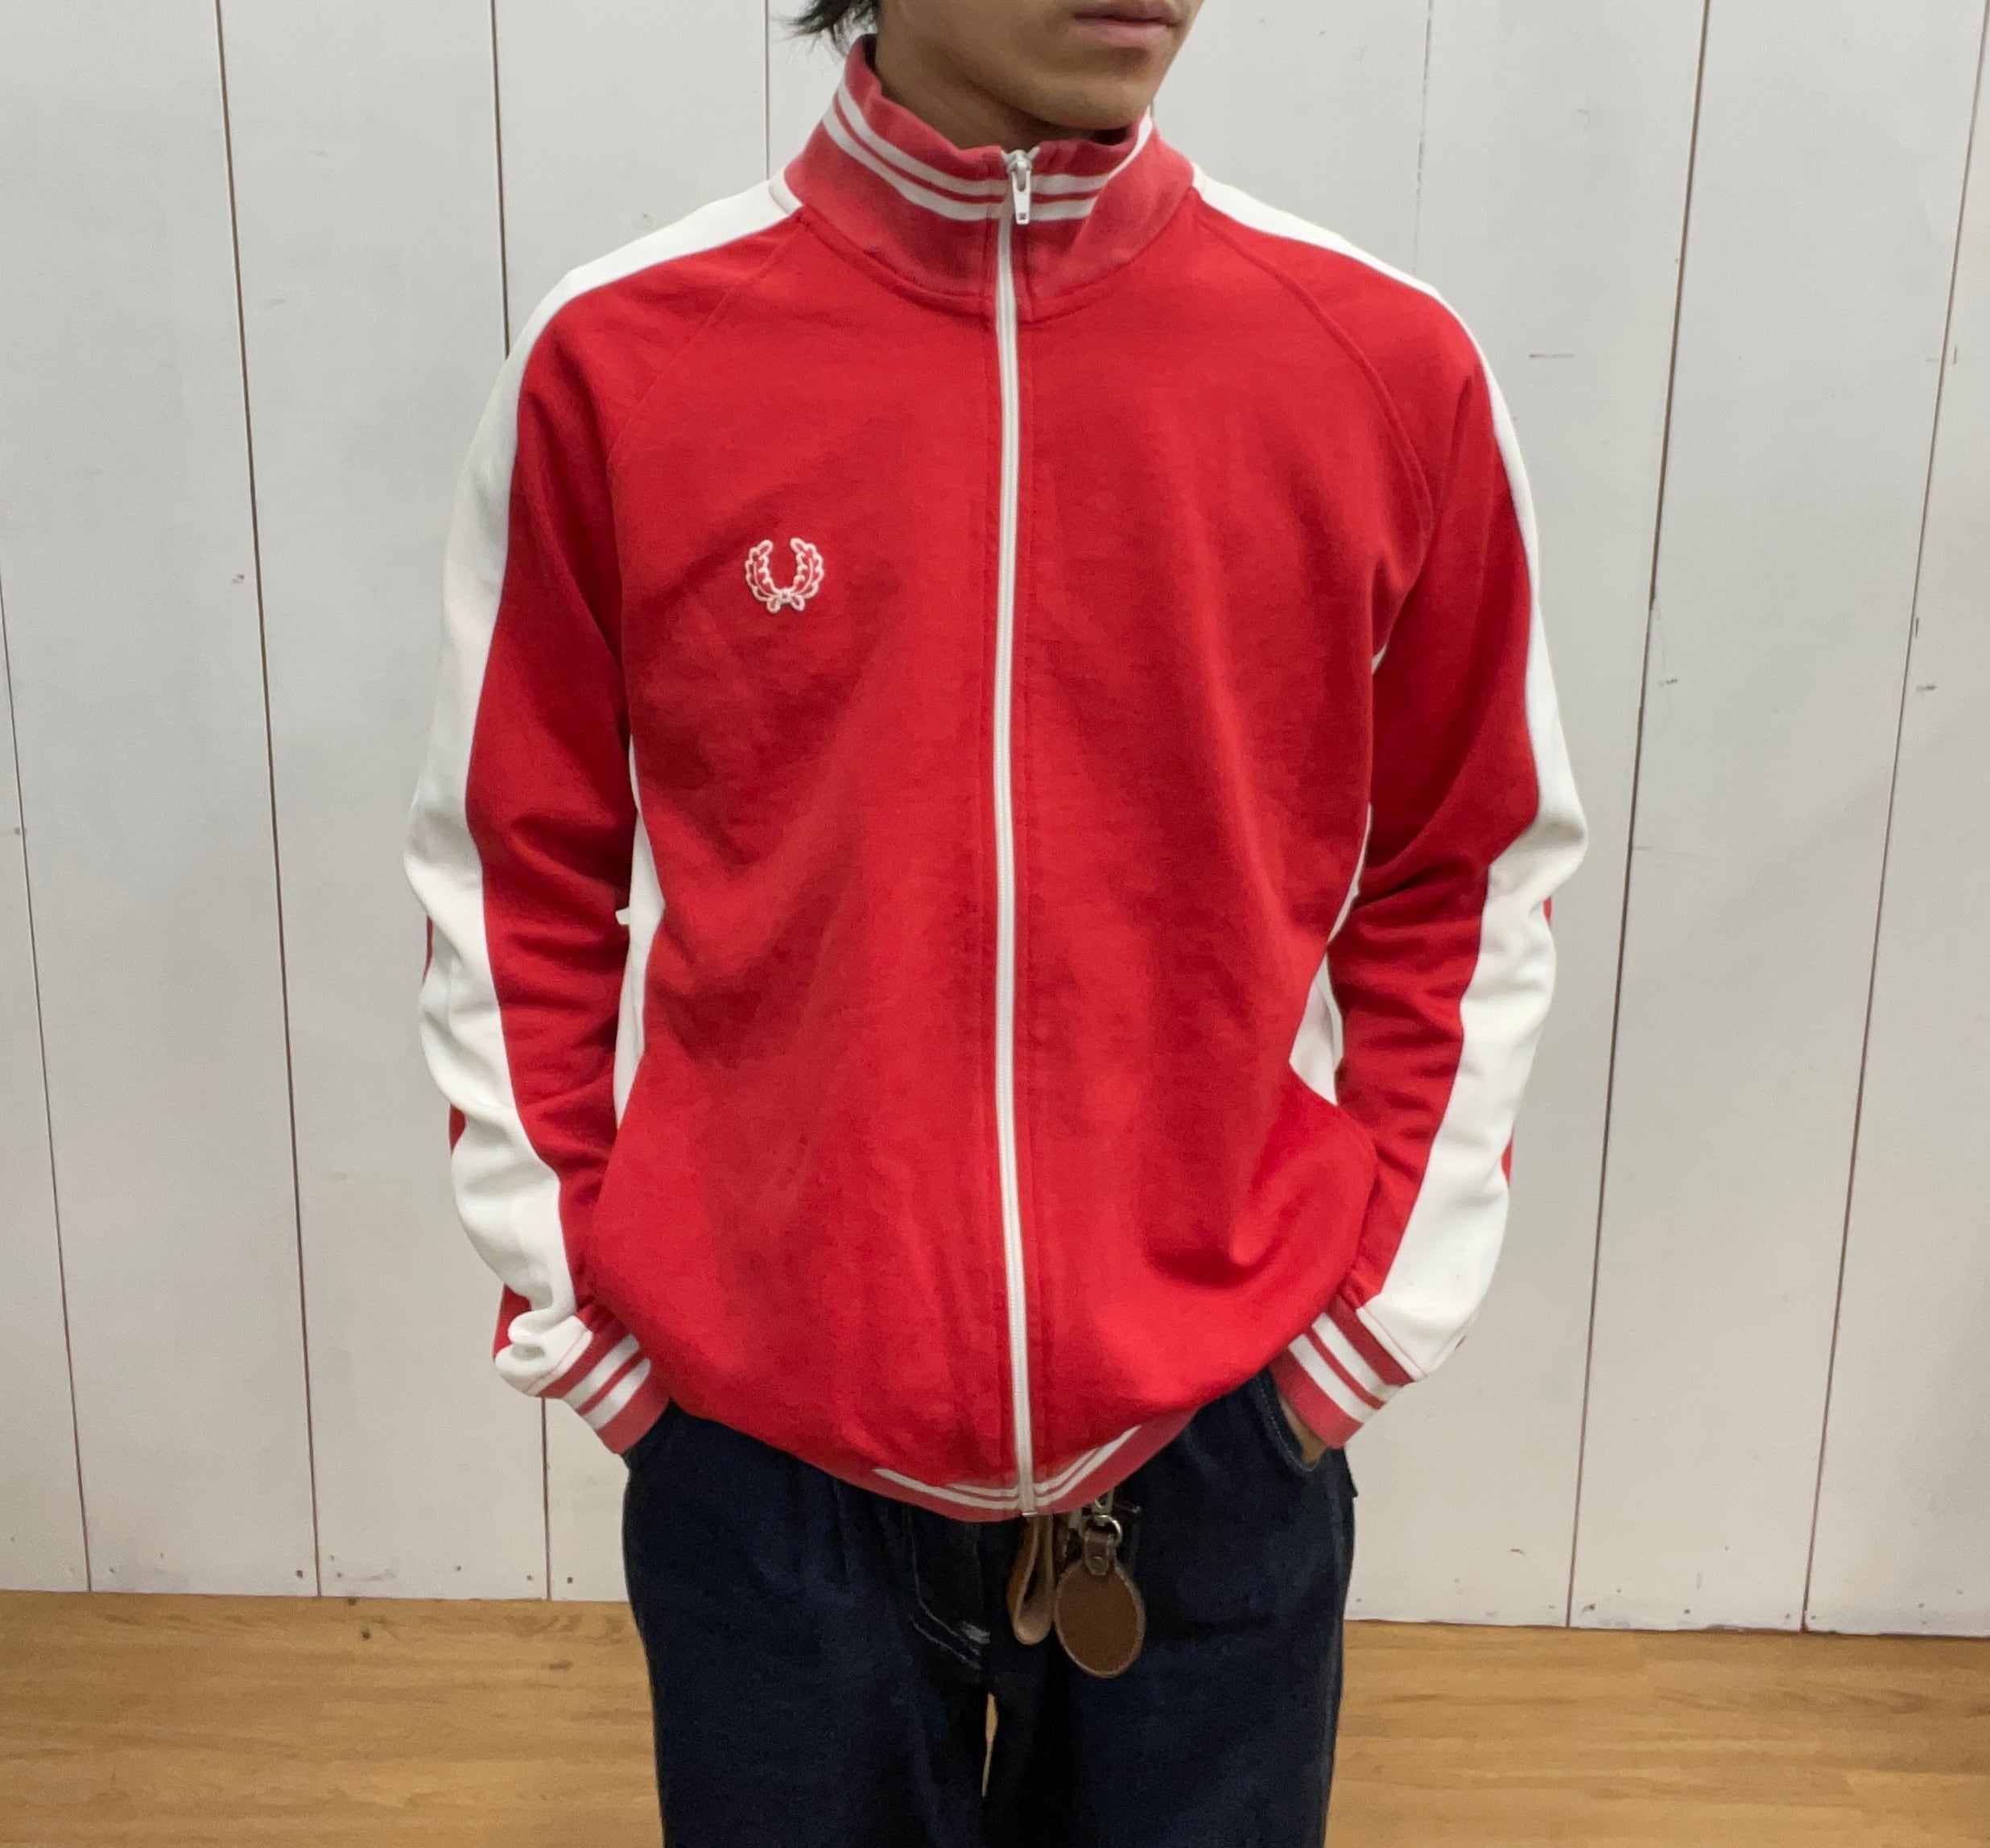 OL-11】FRED PERRY トラックジャケット赤 | 万代書店 長野店 Used 